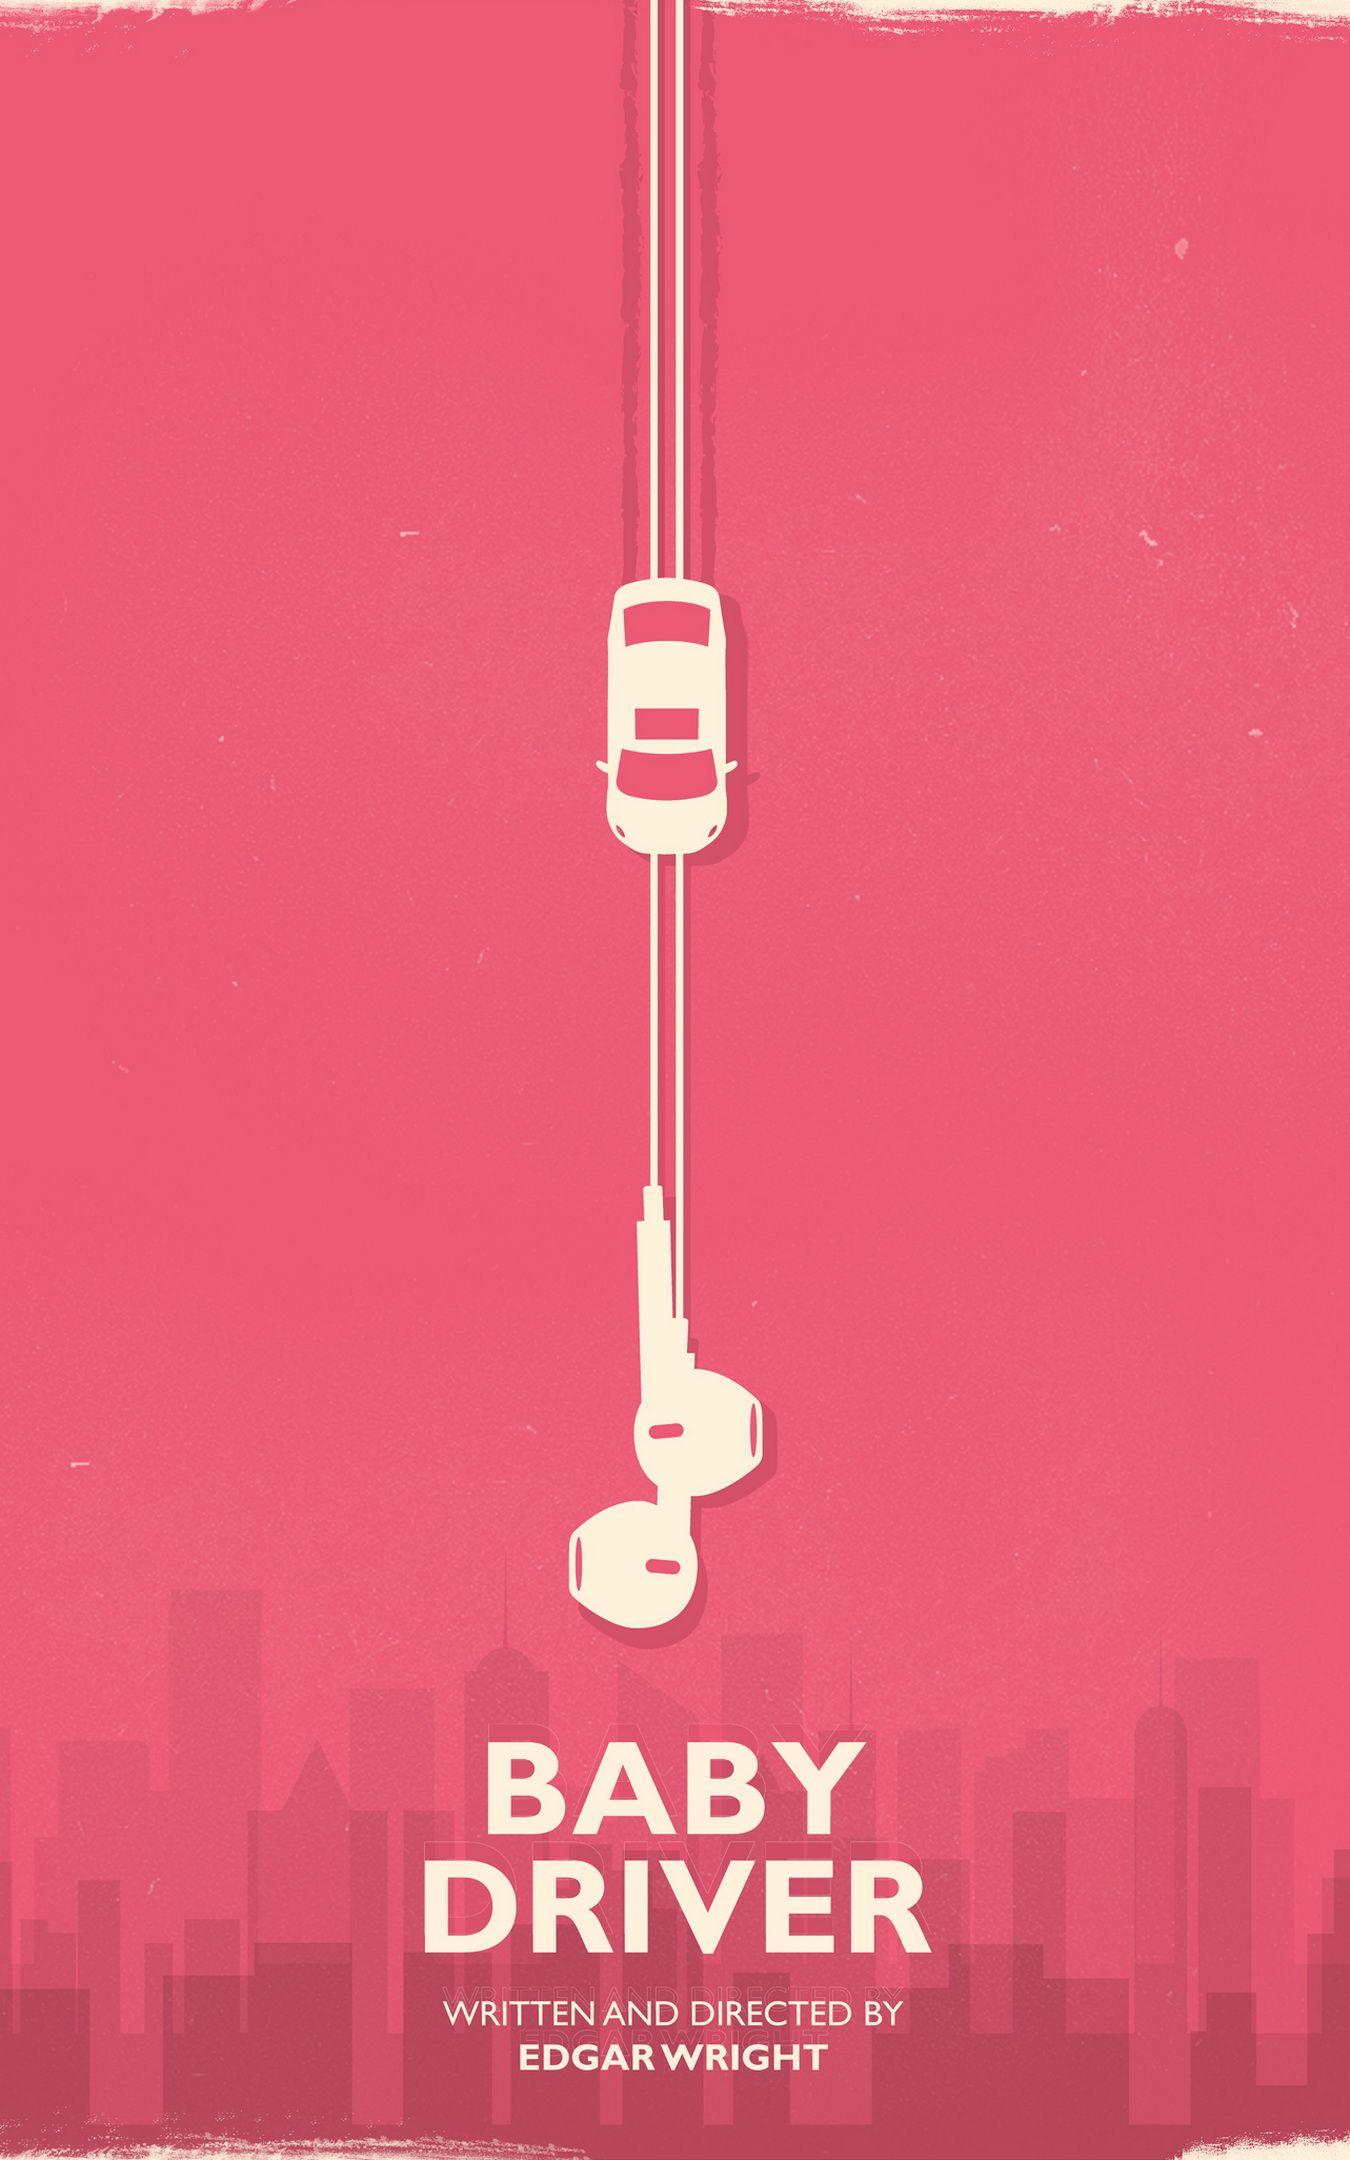 Mobile Wallpapers Movies of the Week Baby Driver, Dunkirk